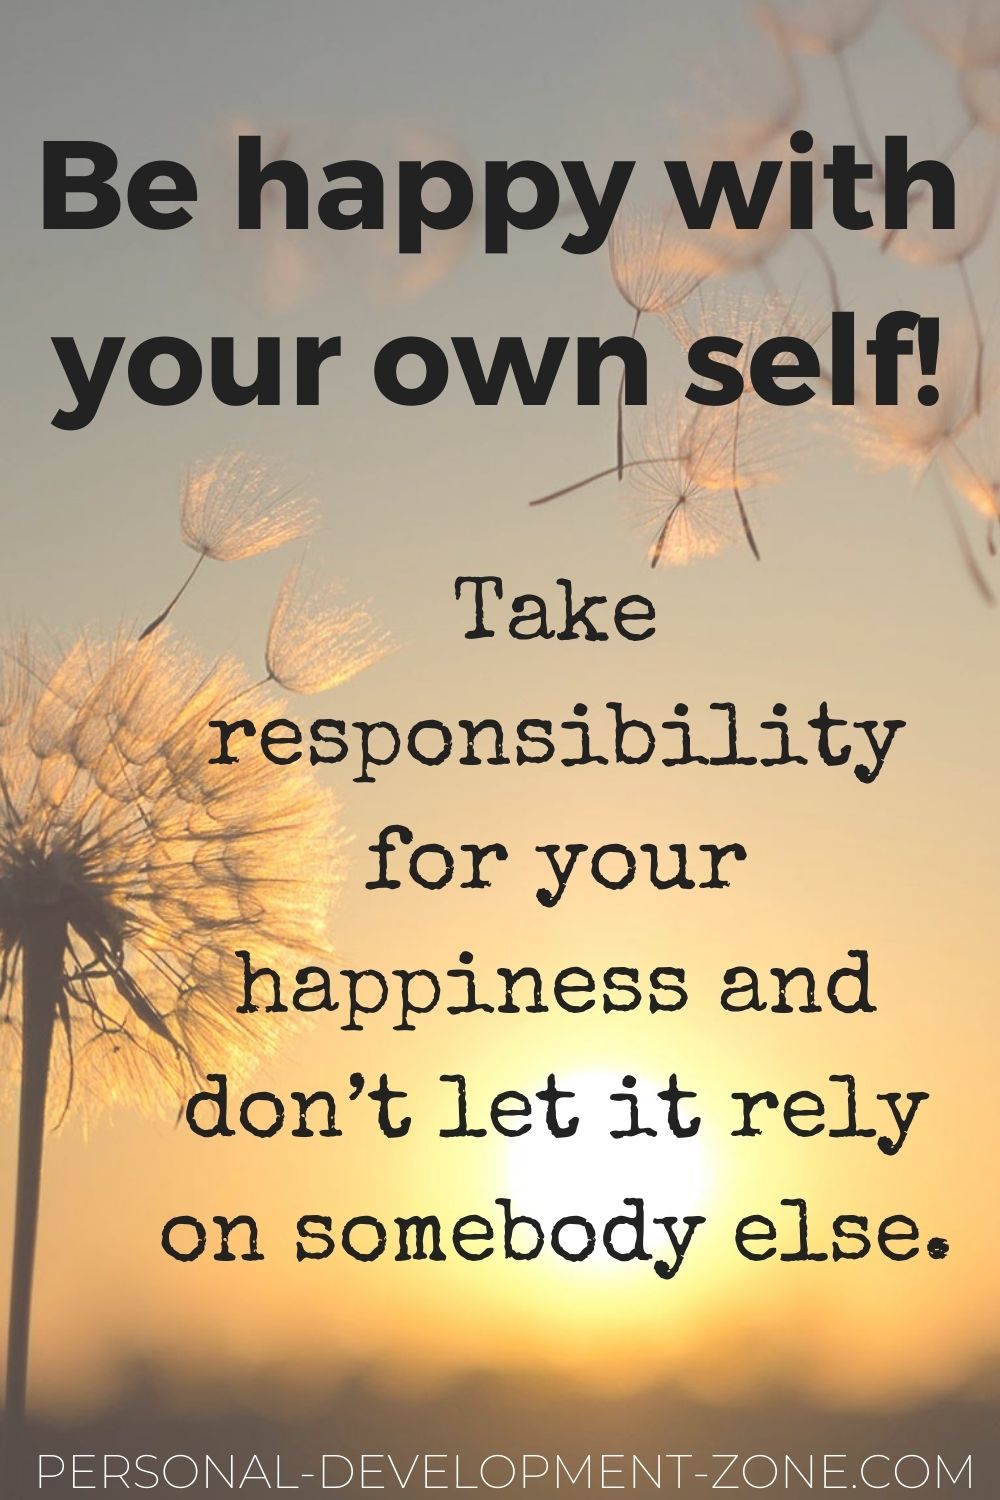 dating quotes that says be happy with your own self take responsibility for your happiness and don't let it rely on somebody else